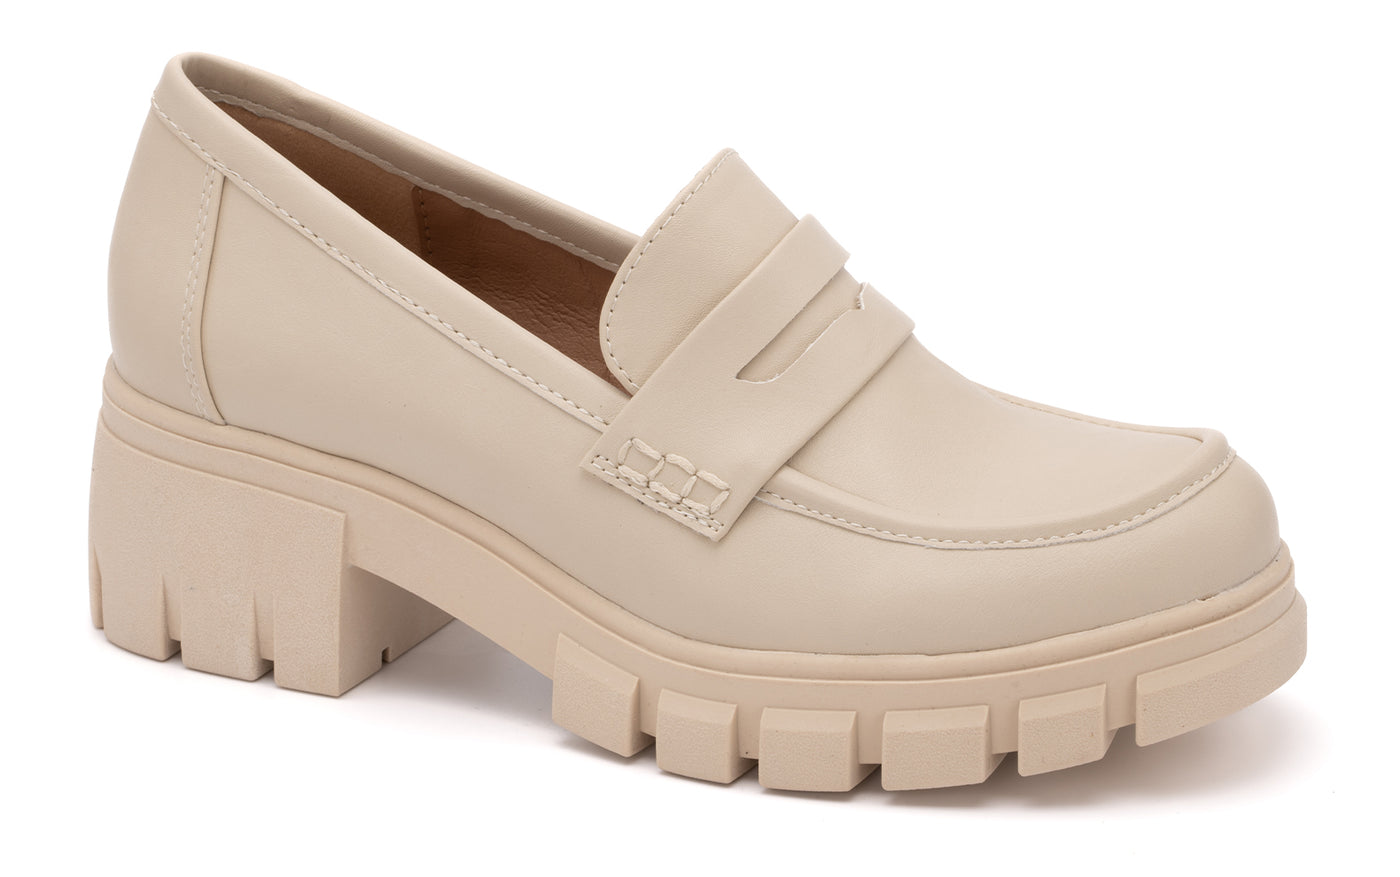 Corkys "Keeper" Loafer in Ivory